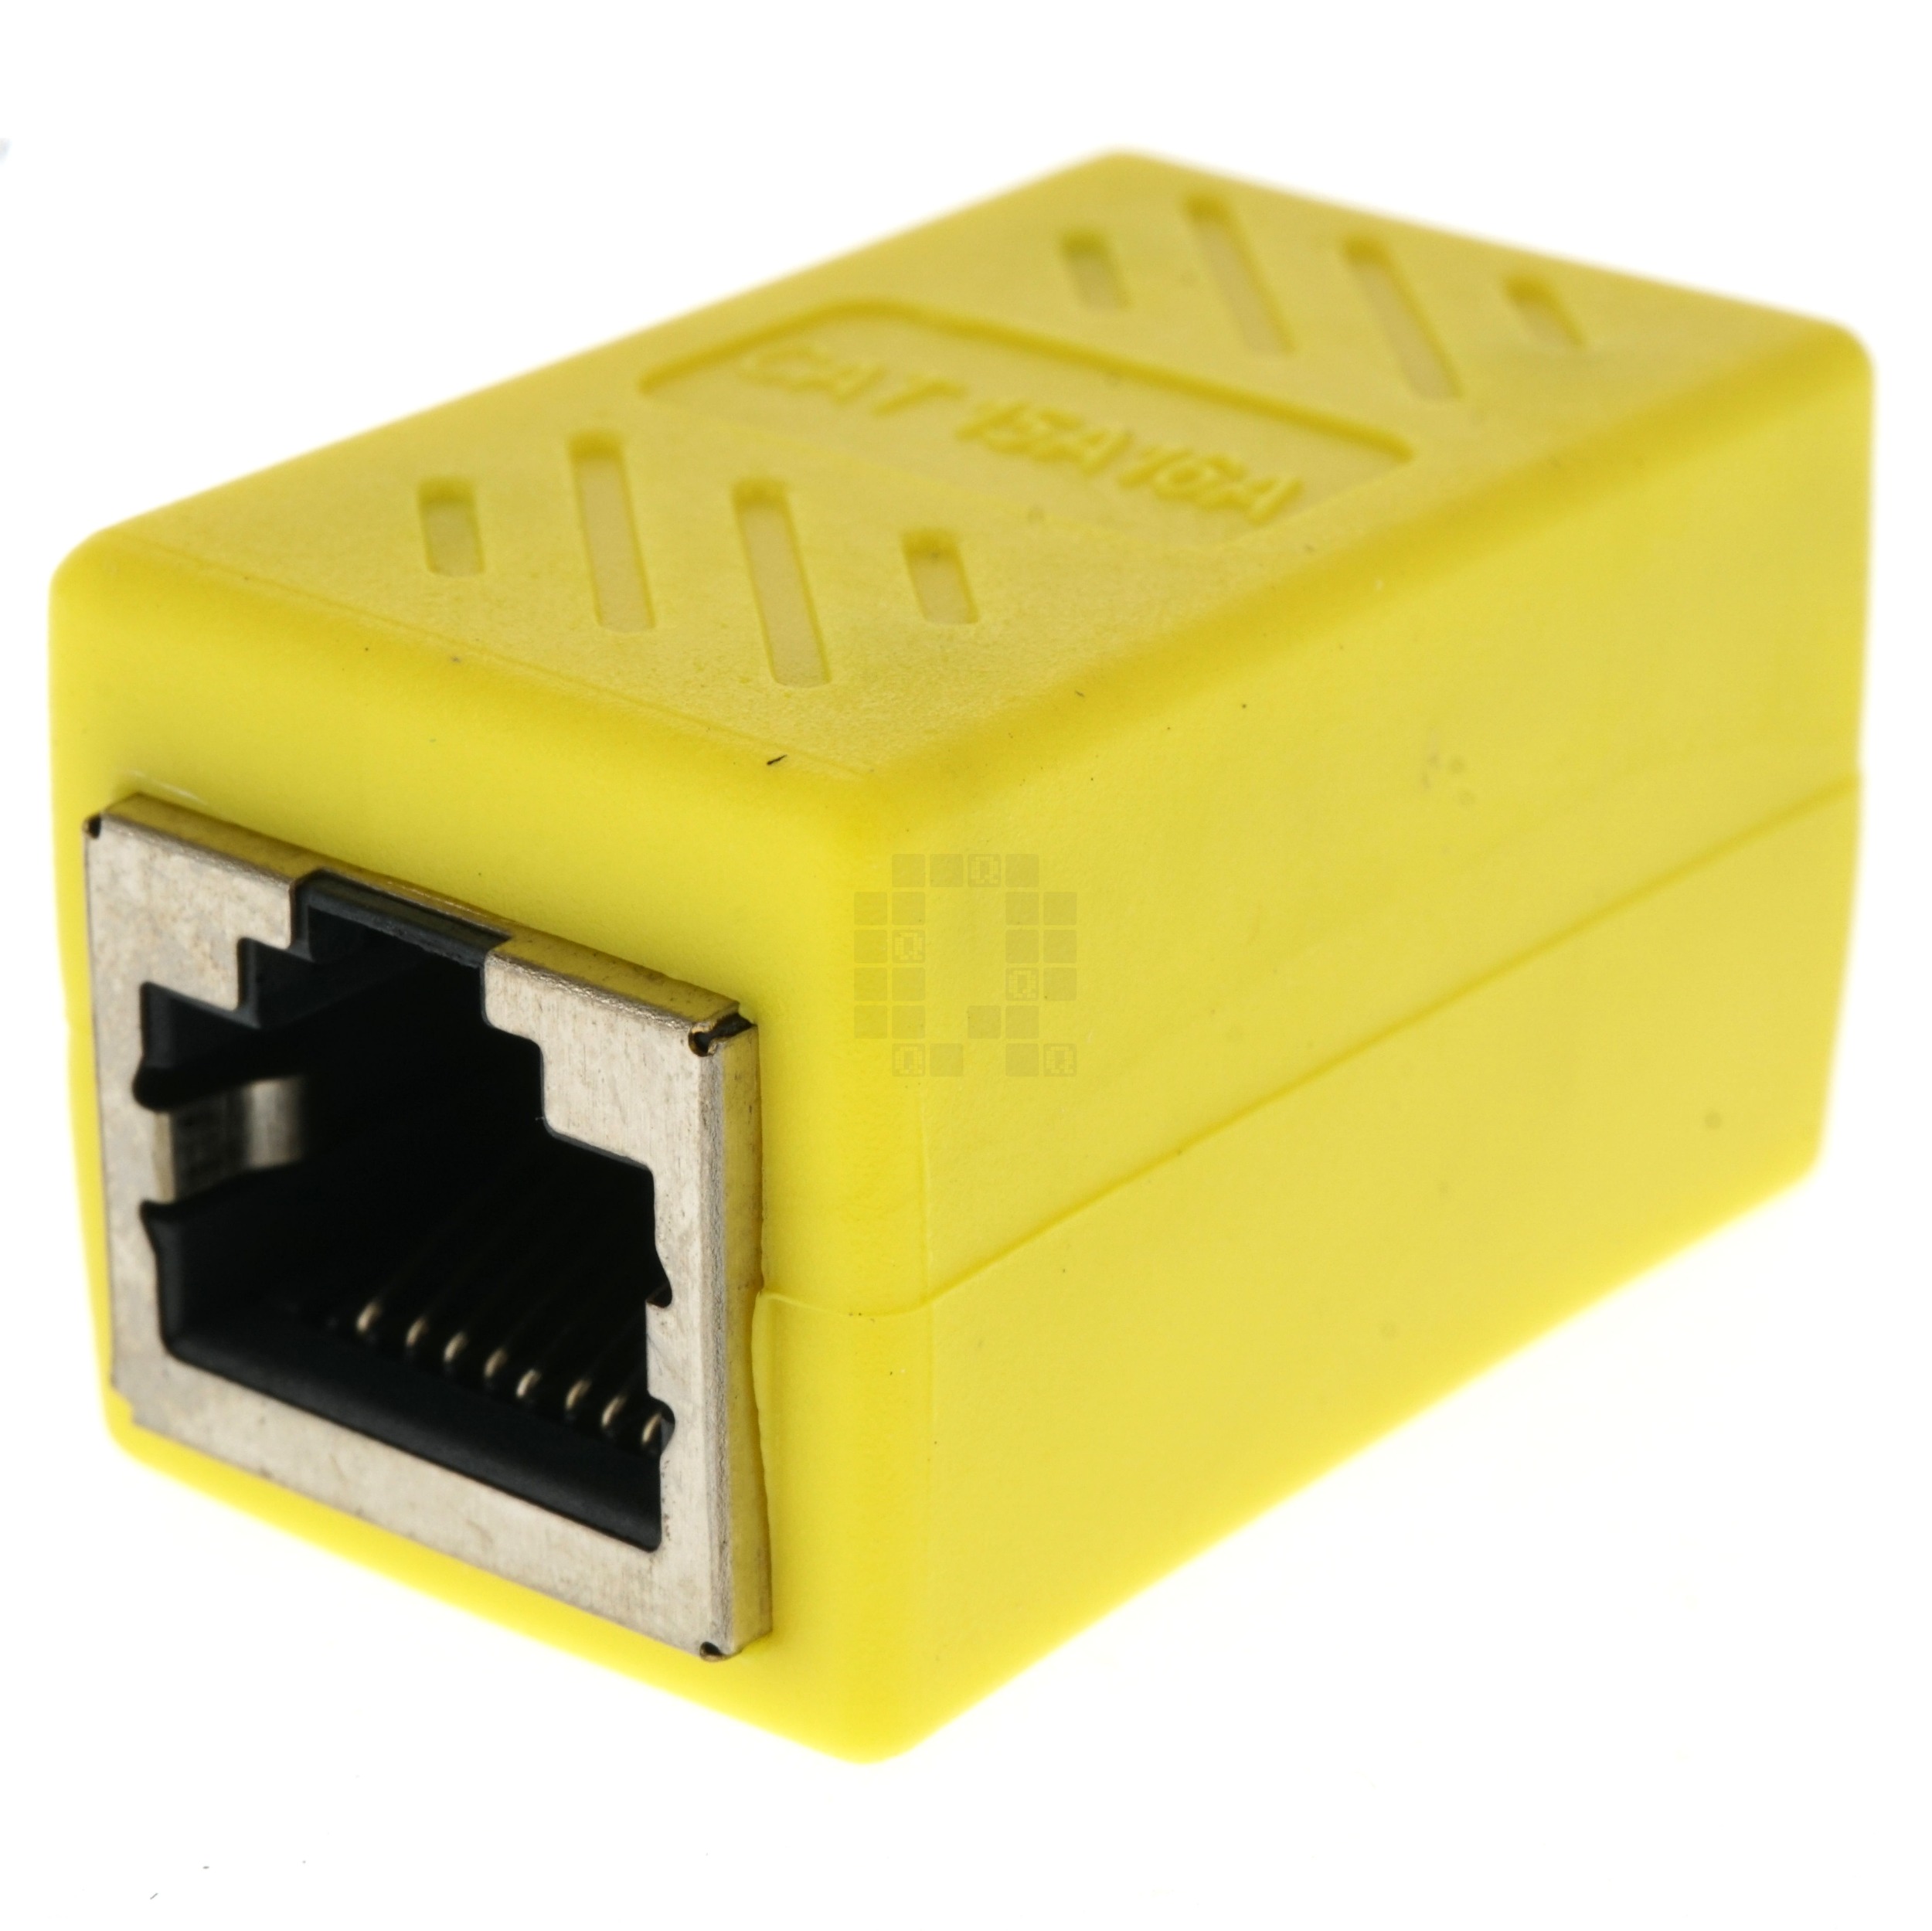 RJ45 CAT6 CAT5e Inline Ethernet Network Cable Coupler Connector, Yellow